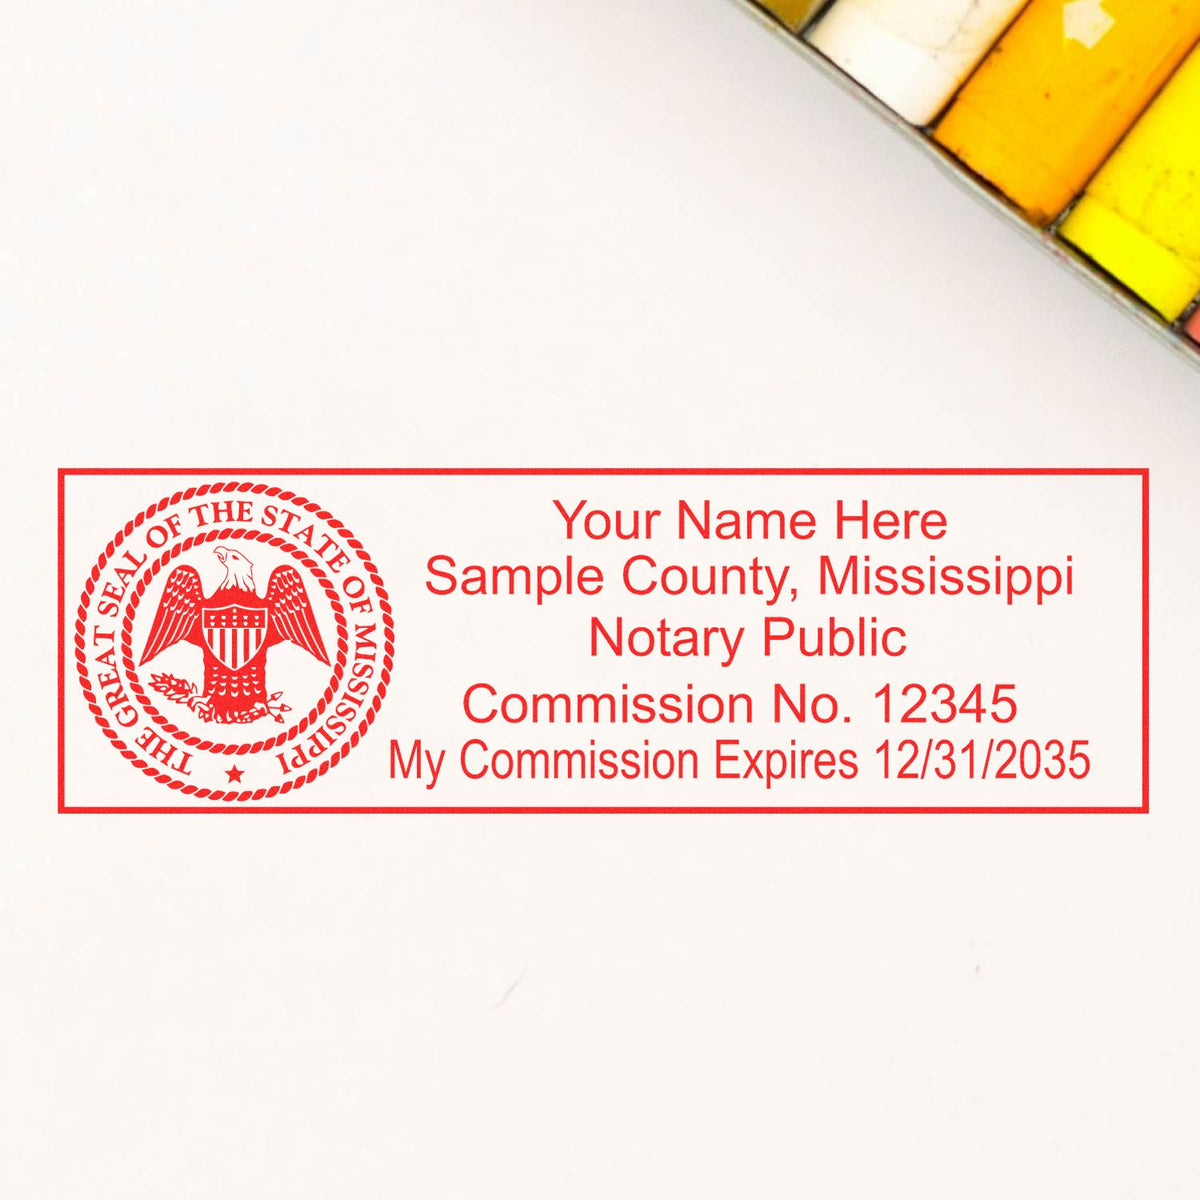 The Heavy-Duty Mississippi Rectangular Notary Stamp stamp impression comes to life with a crisp, detailed photo on paper - showcasing true professional quality.